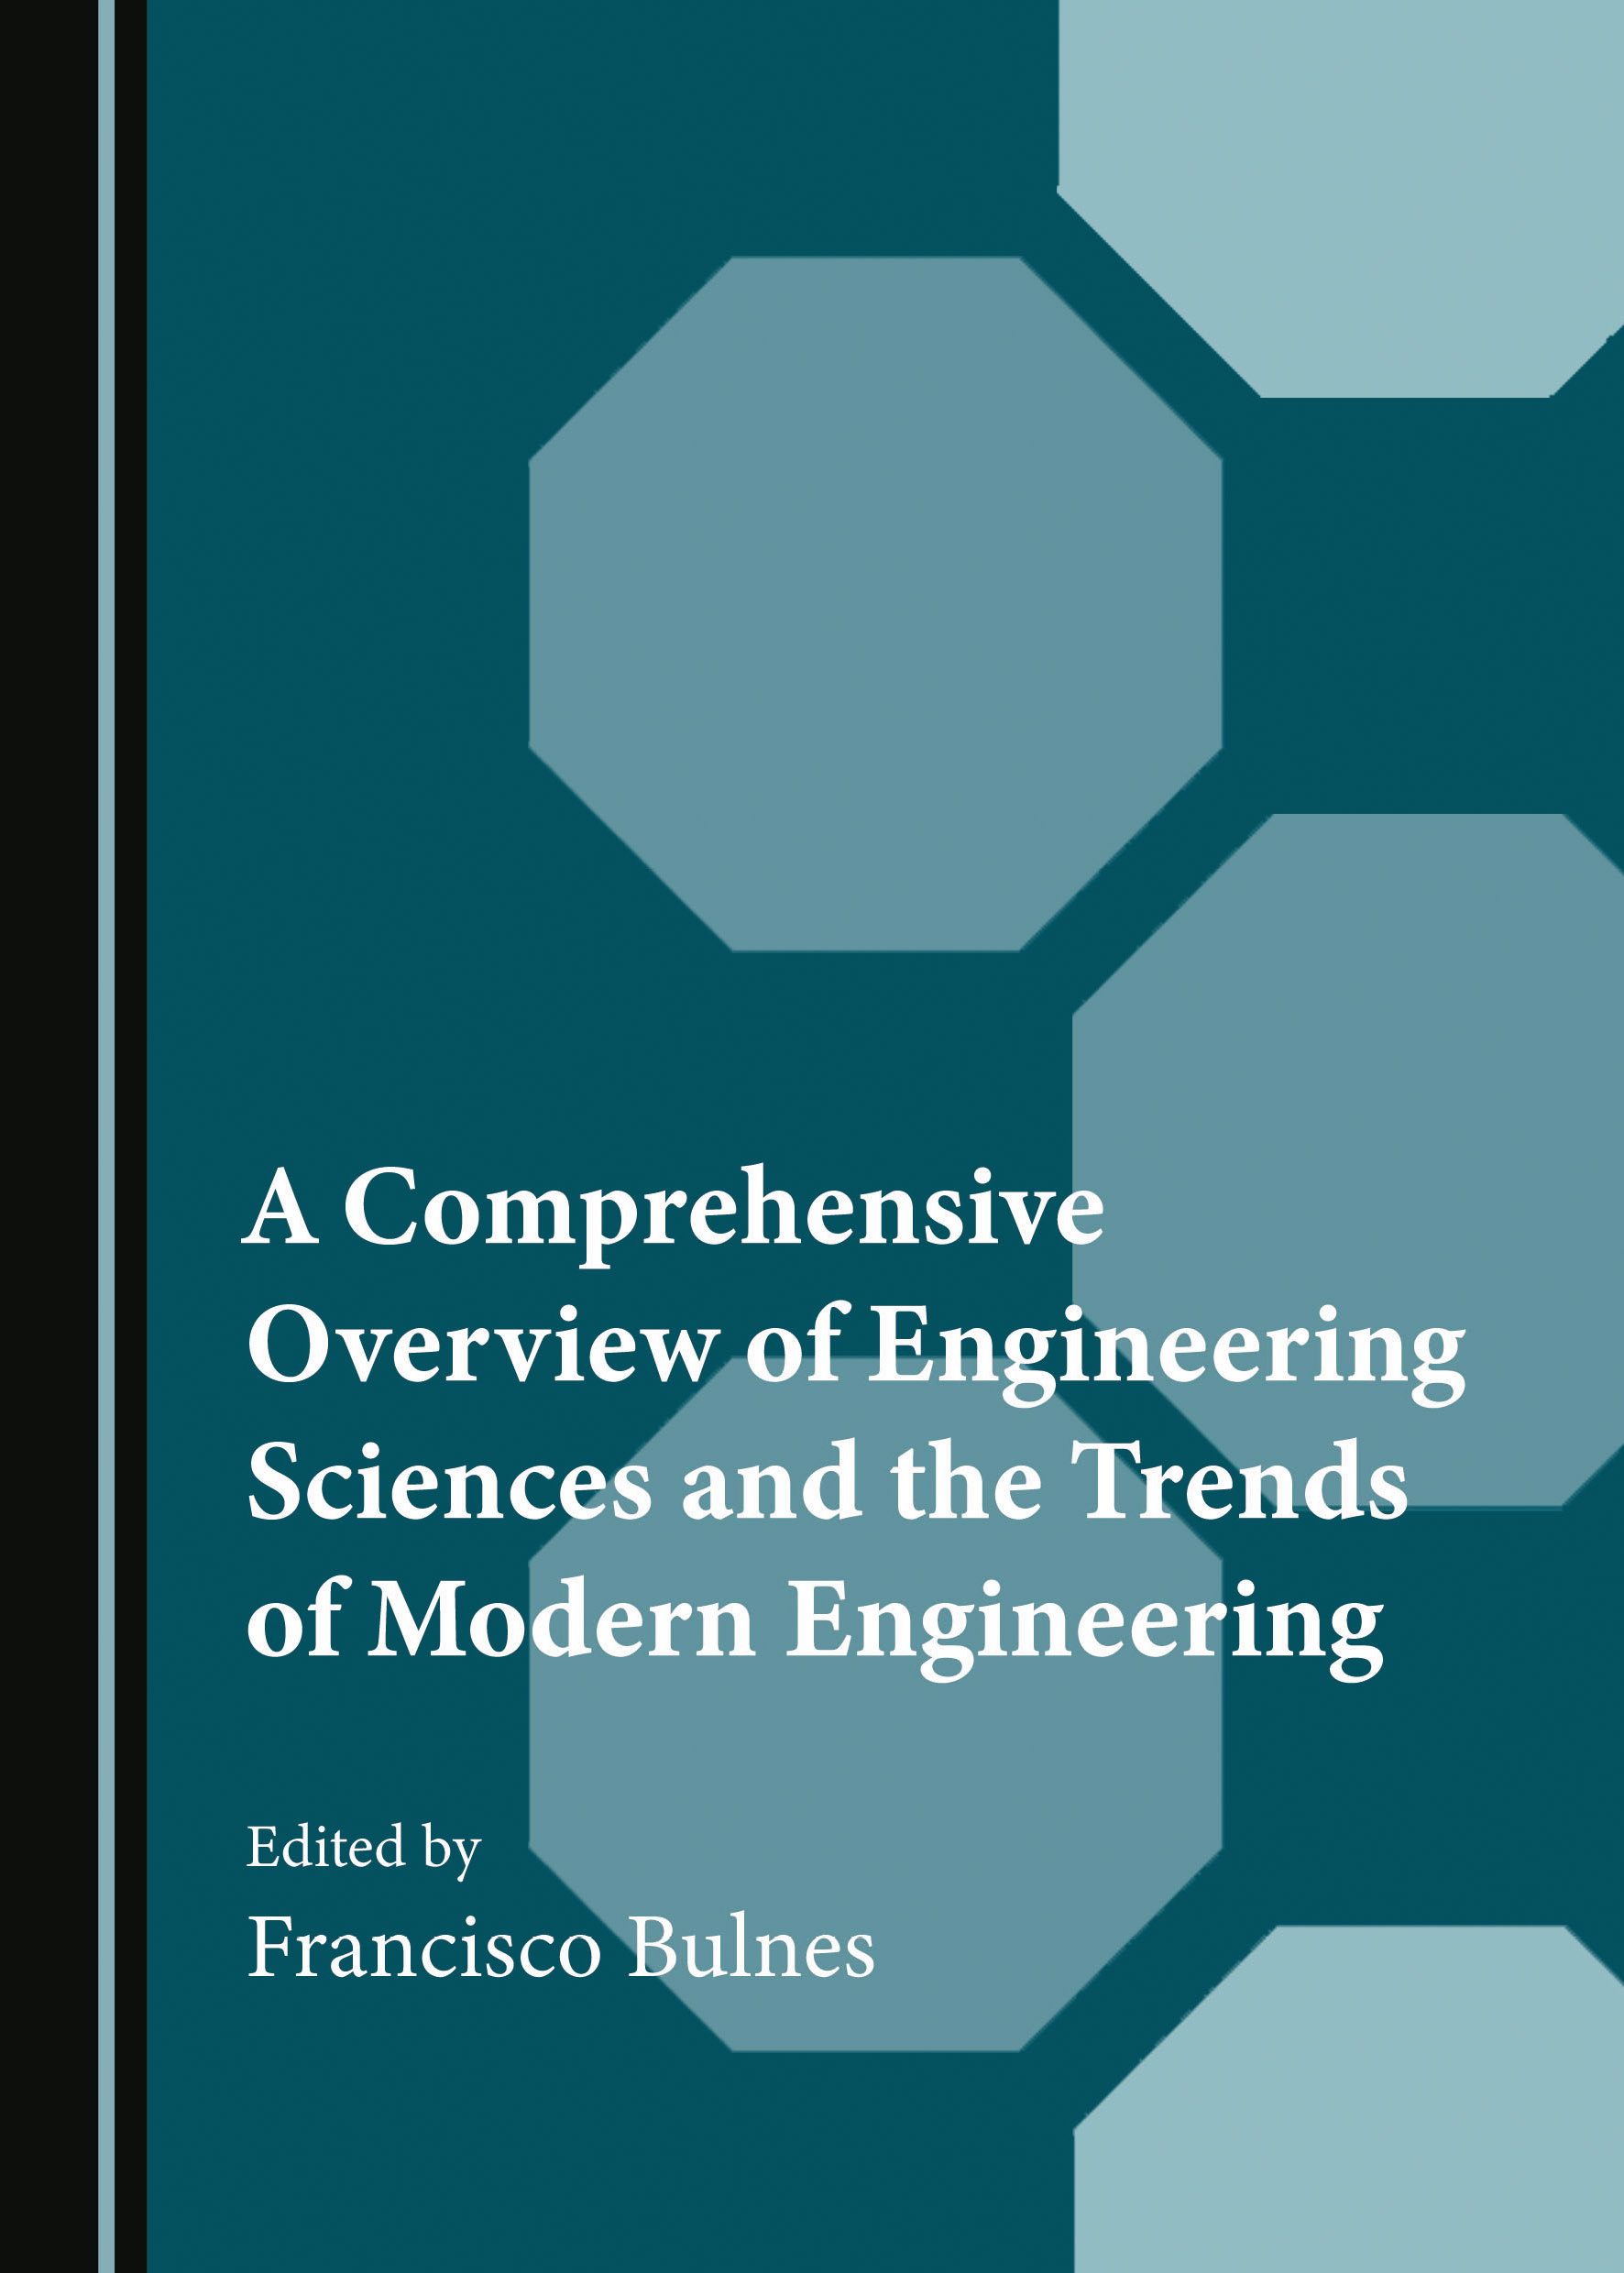 A Comprehensive Overview of Engineering Sciences and the Trends of Modern Engineering